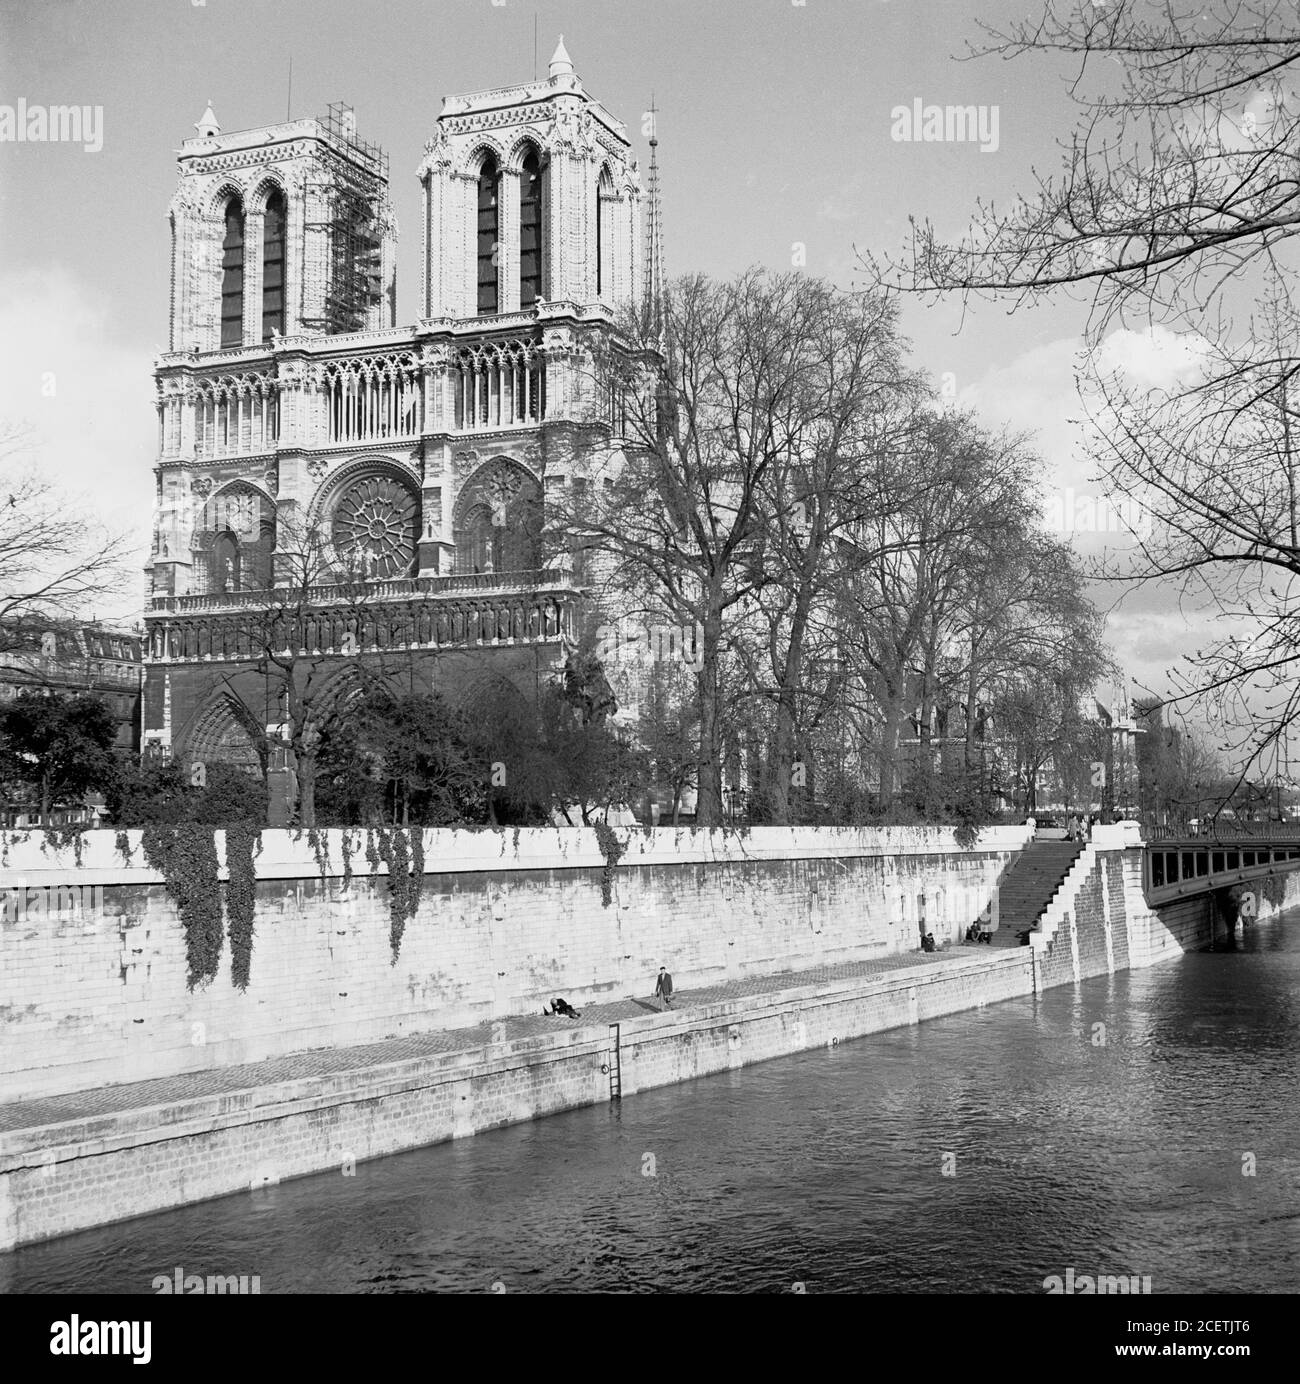 1950s, historical, The Notre-Dame Cathederal as seen from across the river Seine, Paris, France. A medieval Catholic church on the IIe de la Cite in the 4th arrondissement of Paris, it is considered one of the finest examples of French Gothic architecture. Stock Photo